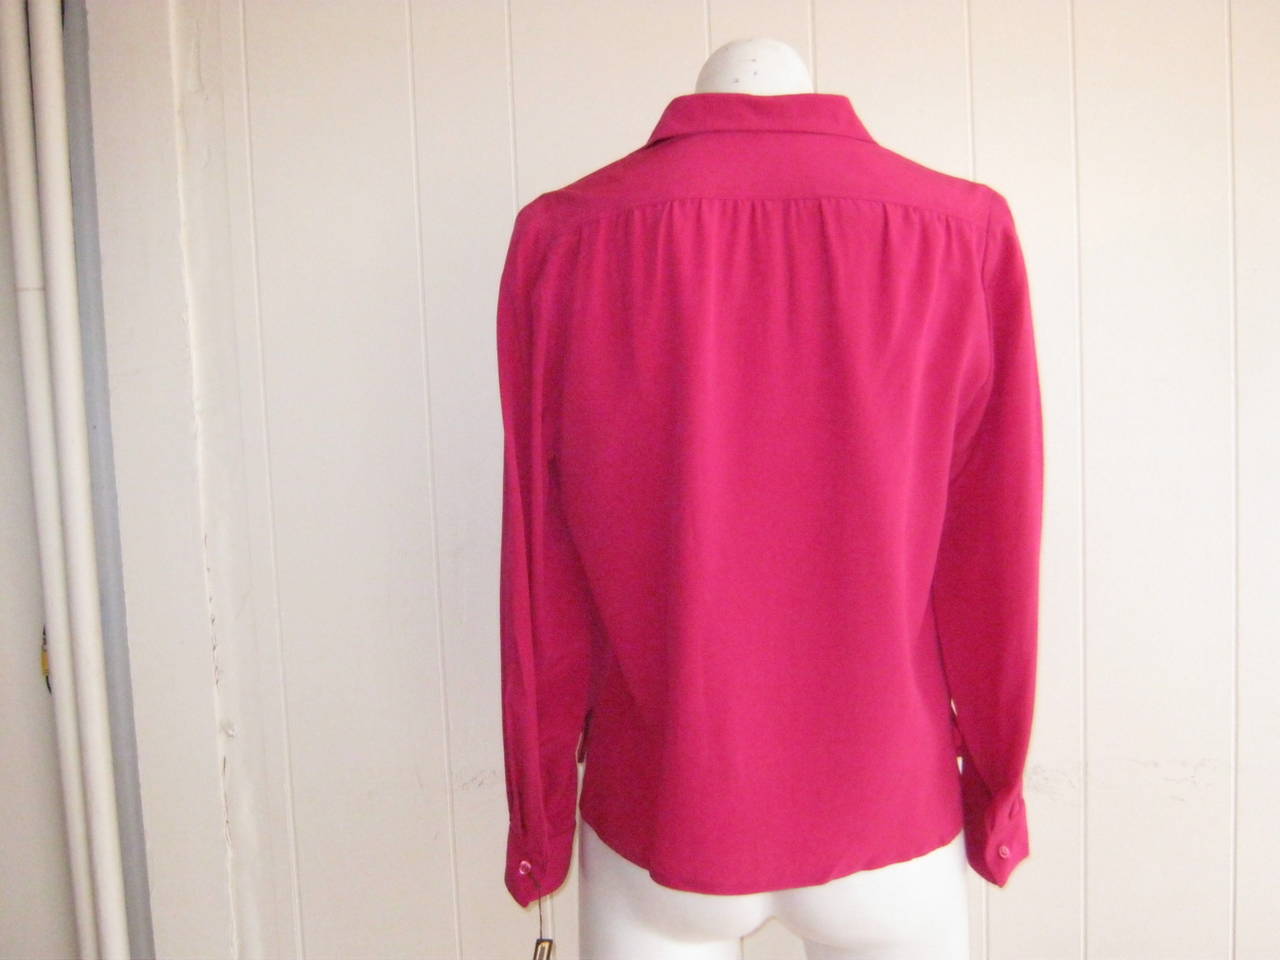 Wonderfully simple and elegant, this silk blouse still carries the original plastic tag with a price of $475.

The only sign of the 1960s is the slight blousing below the collar in the back.